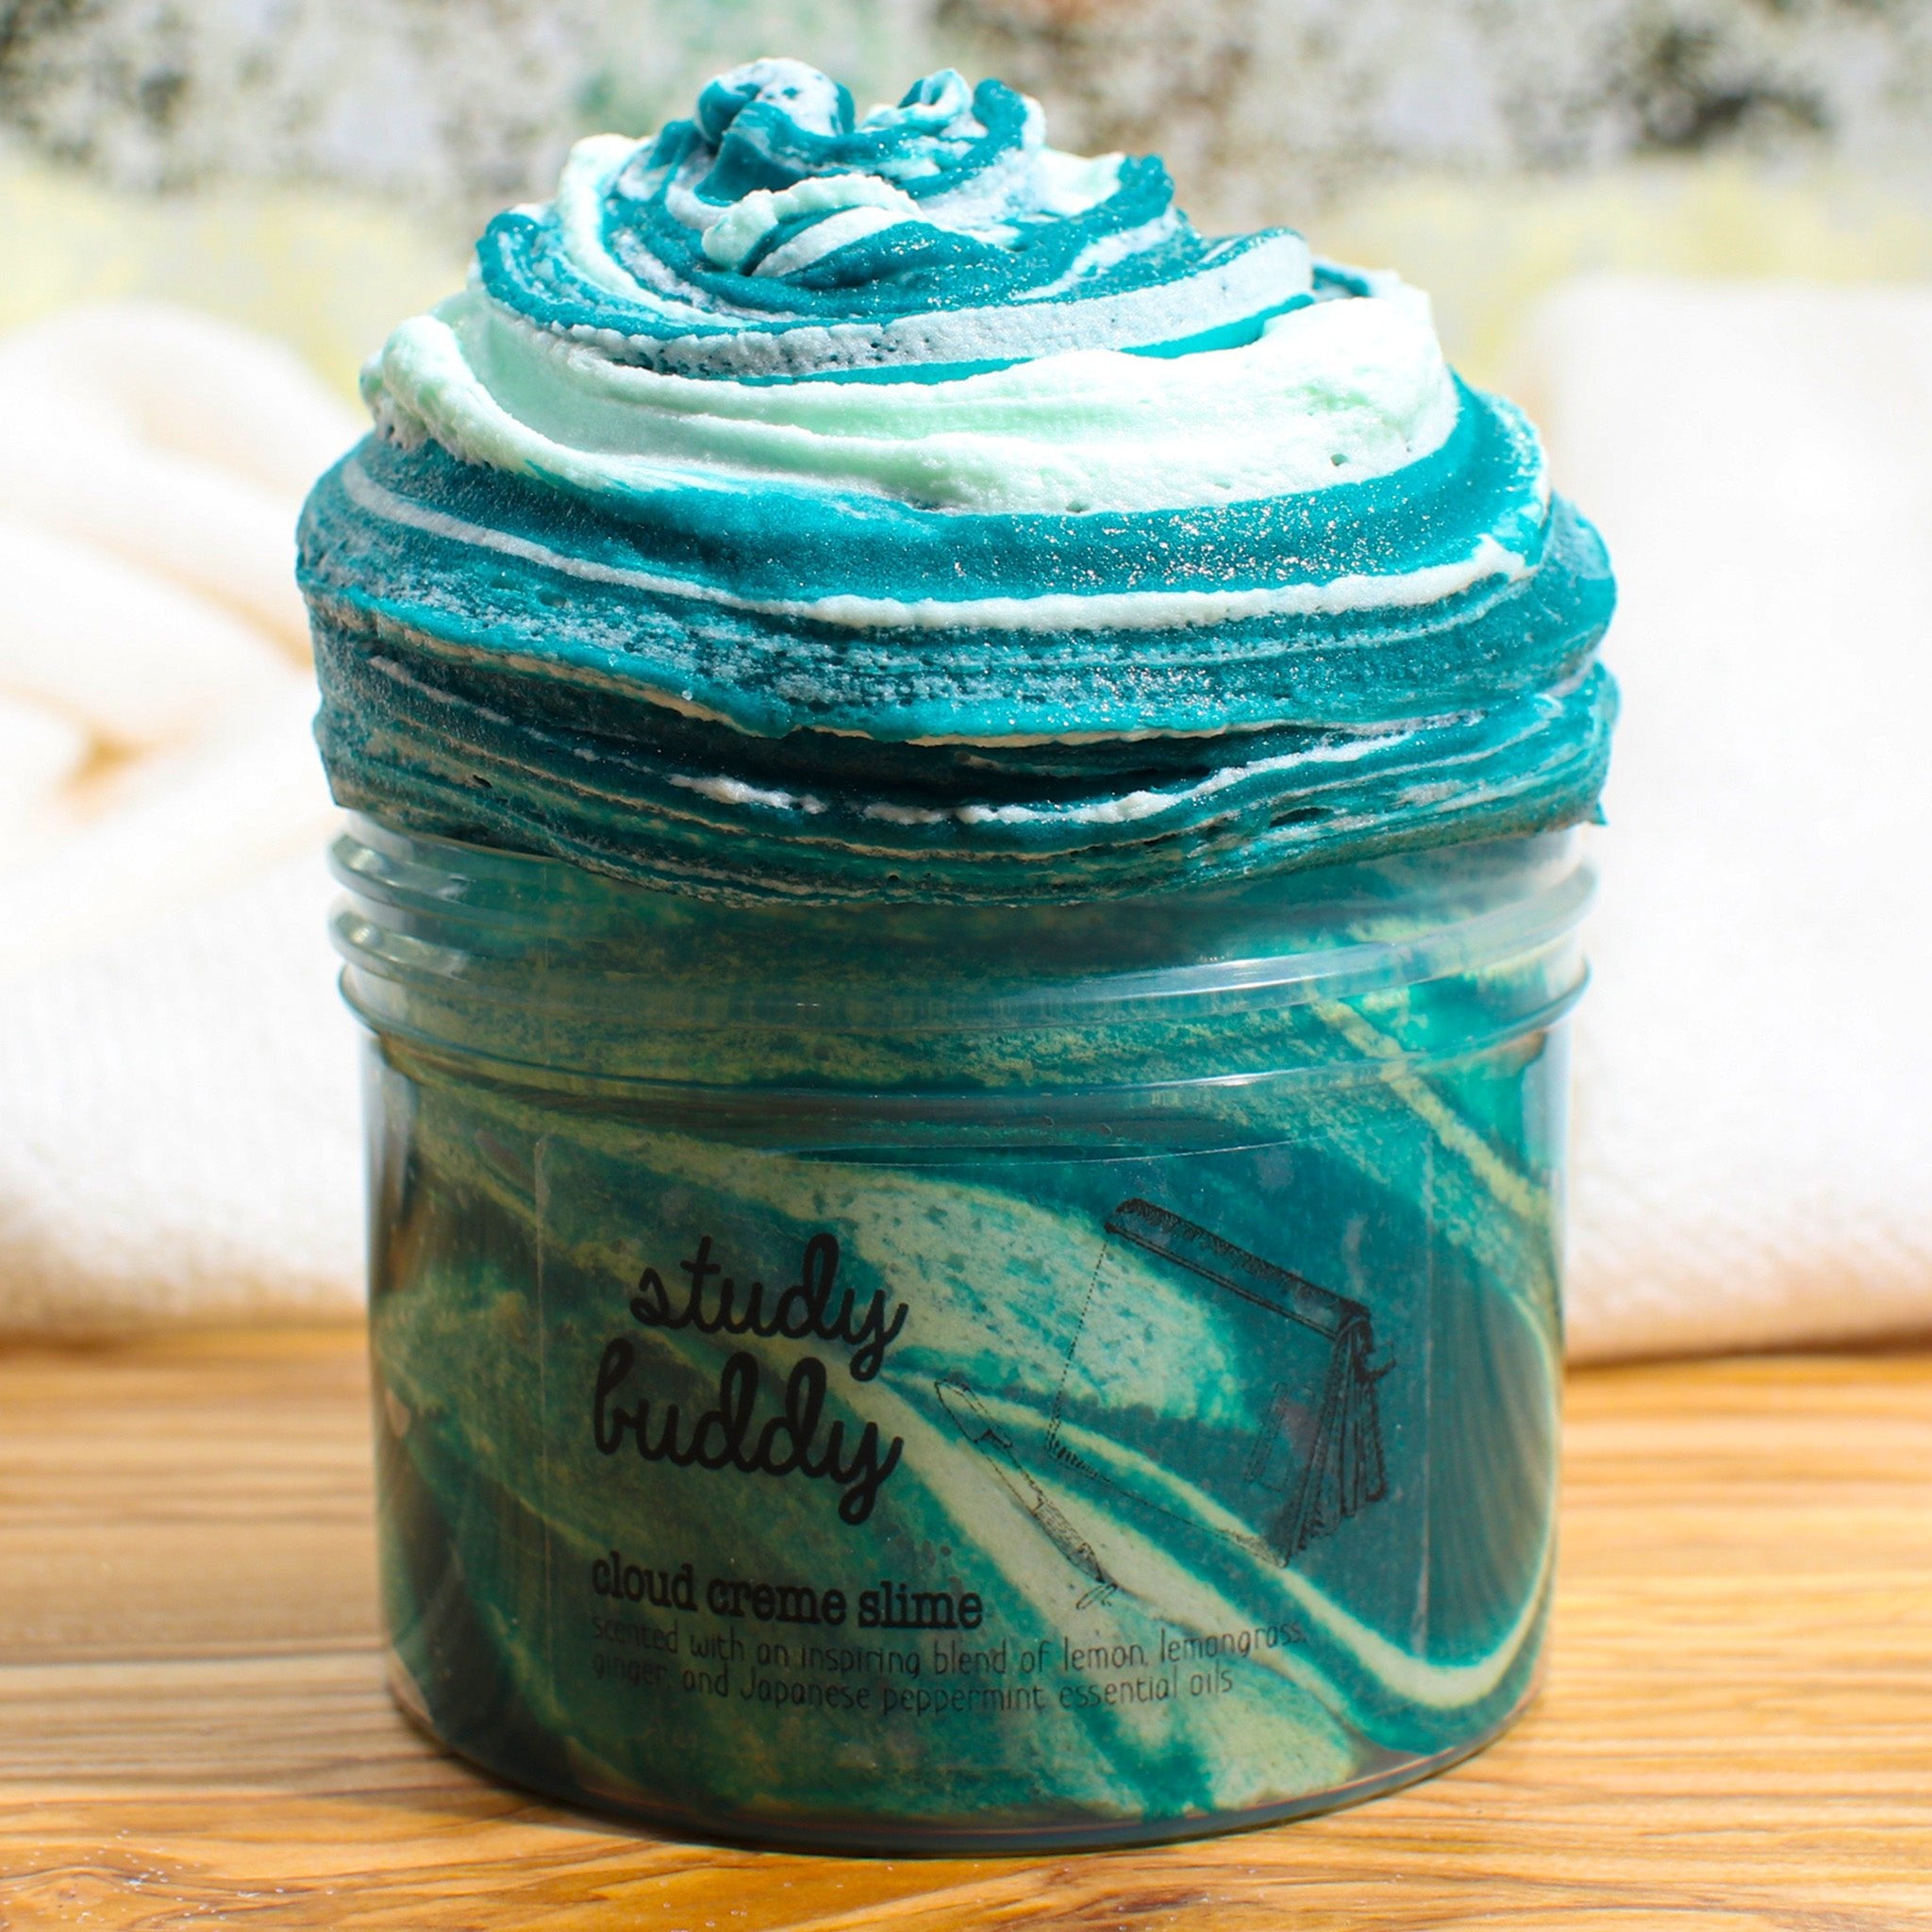 No more boring slime - Learn how to make scented slime today!